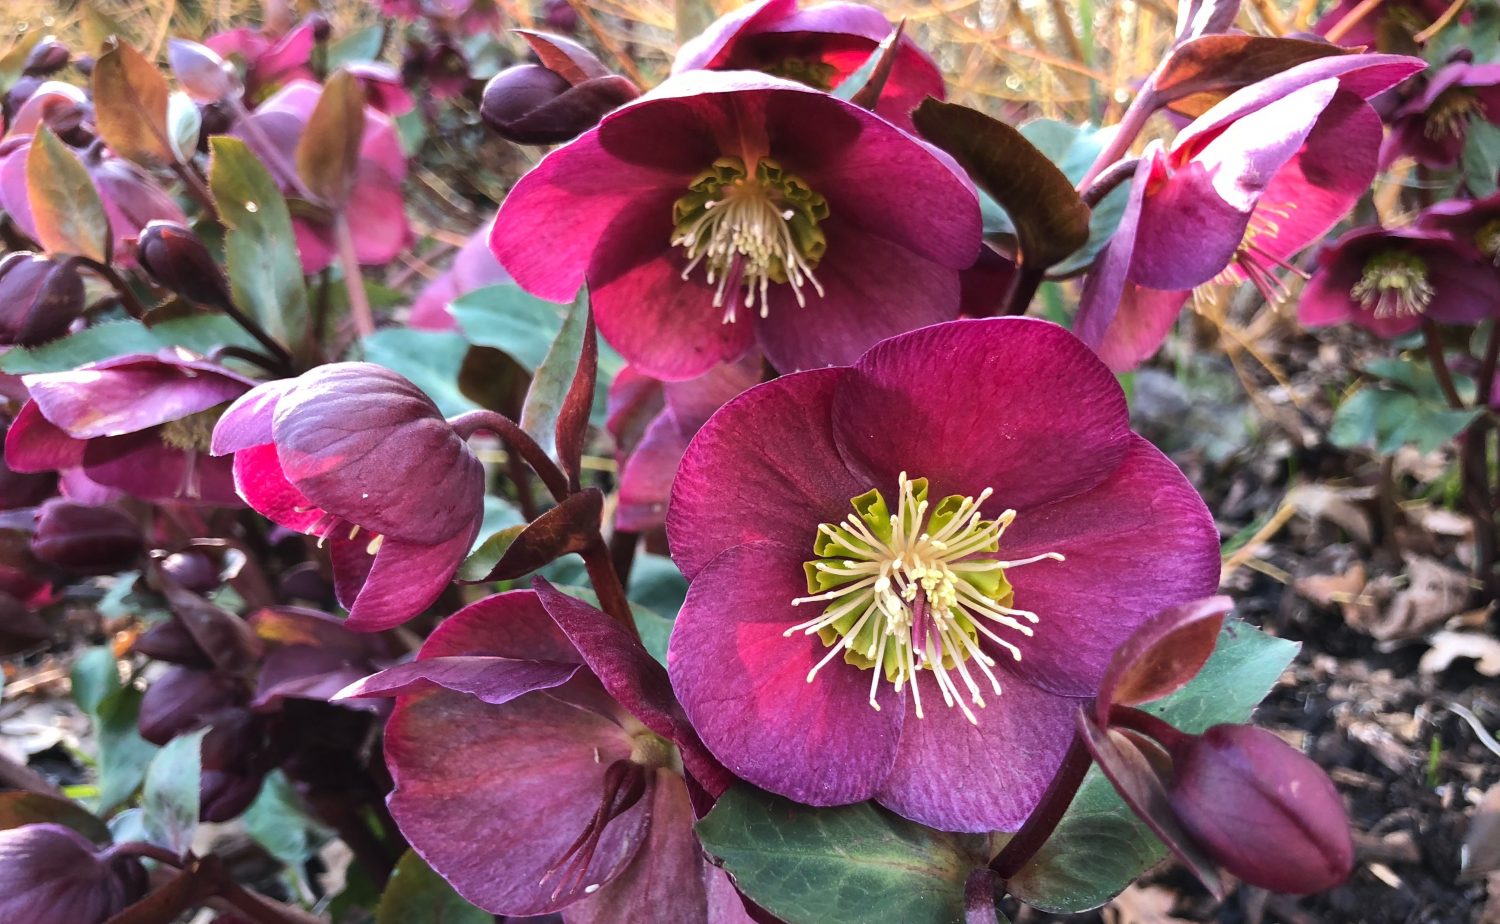 Hellebores brighten up shady corners and look great in winter containers